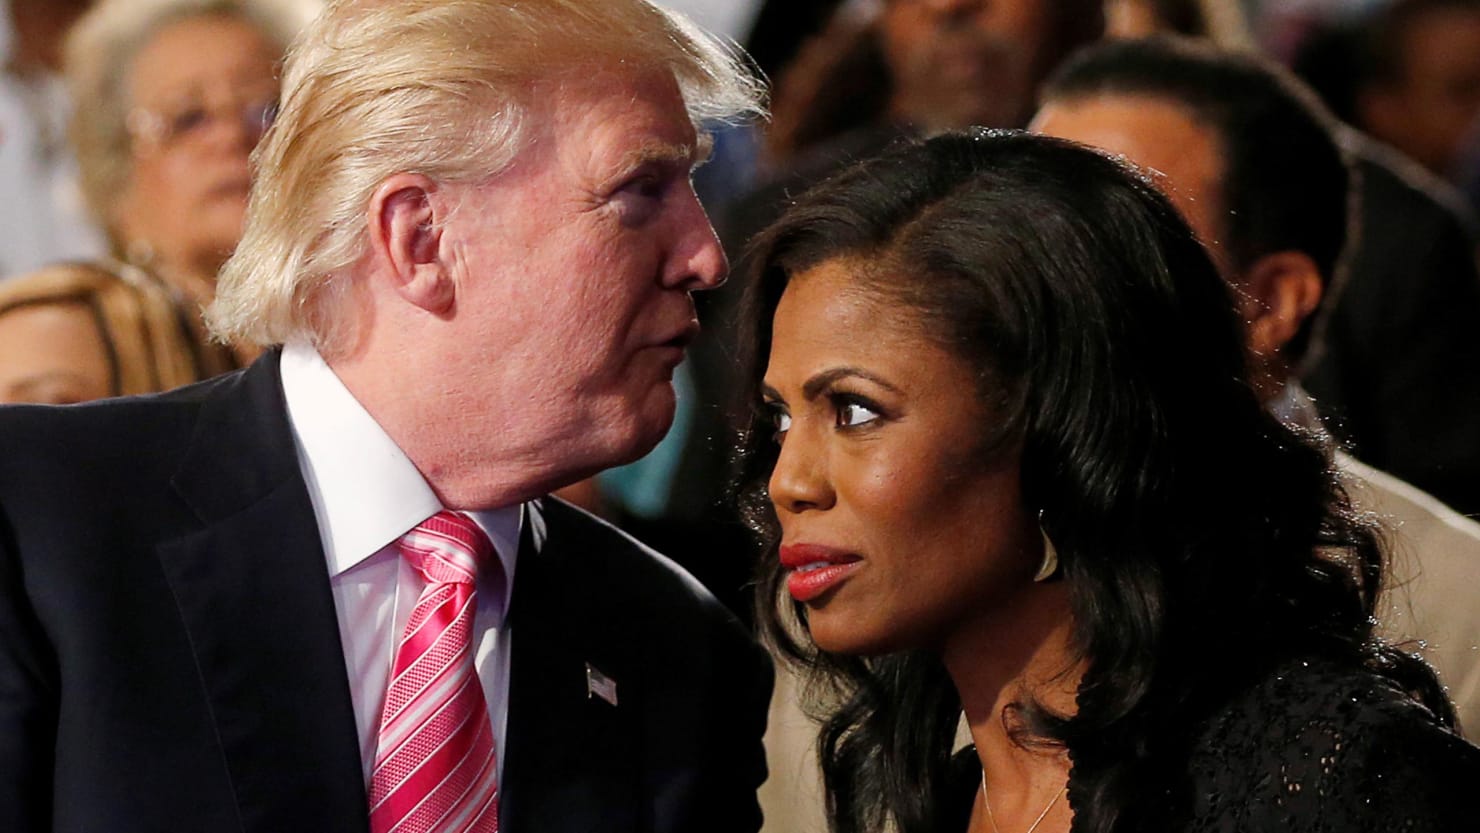 Trump Continues Attack On Omarosa Calling Her a 'Dog'